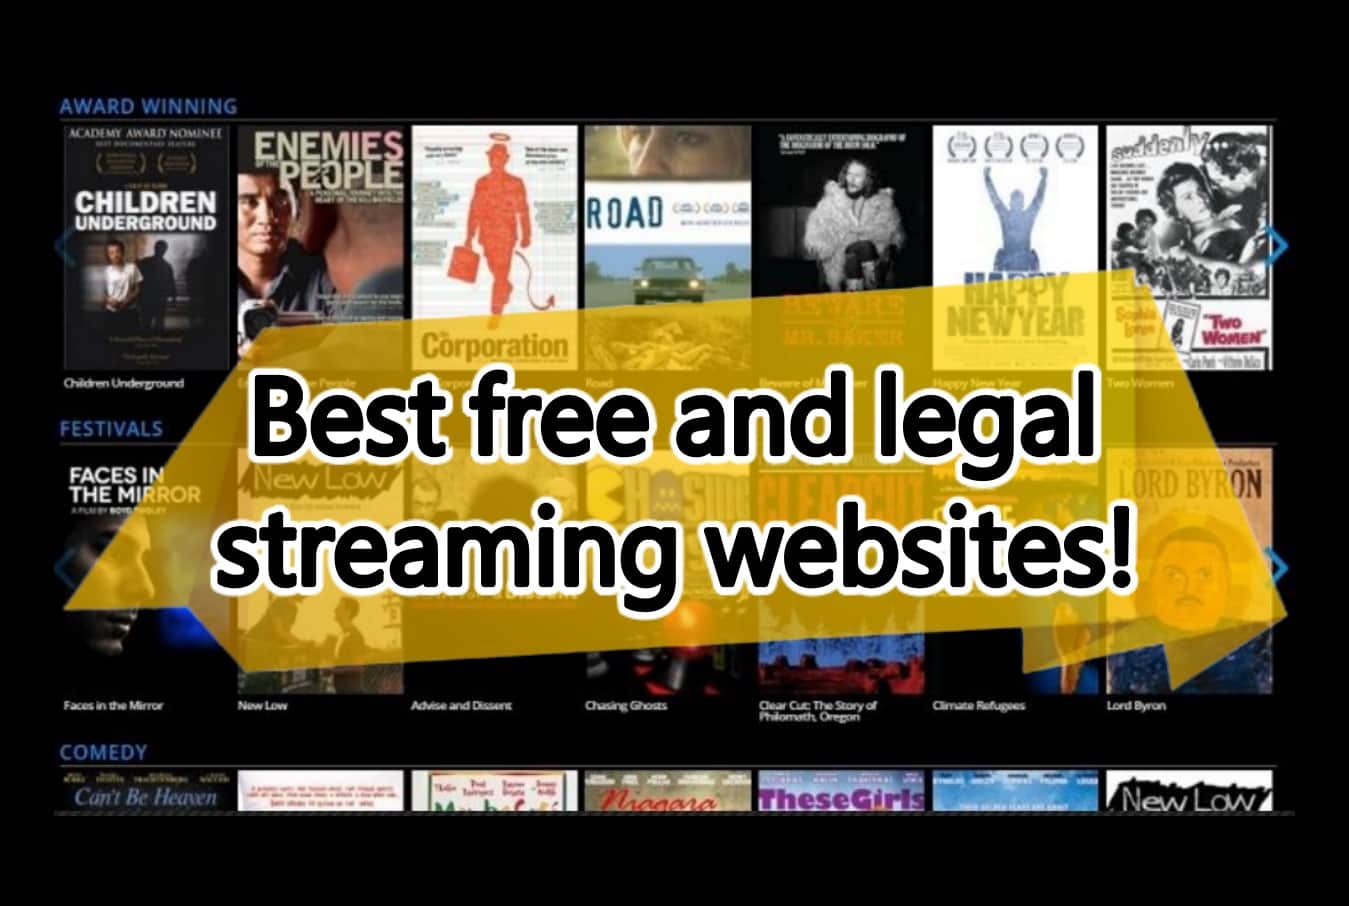 Best legal & free online streaming sites for movies & TV shows 2020